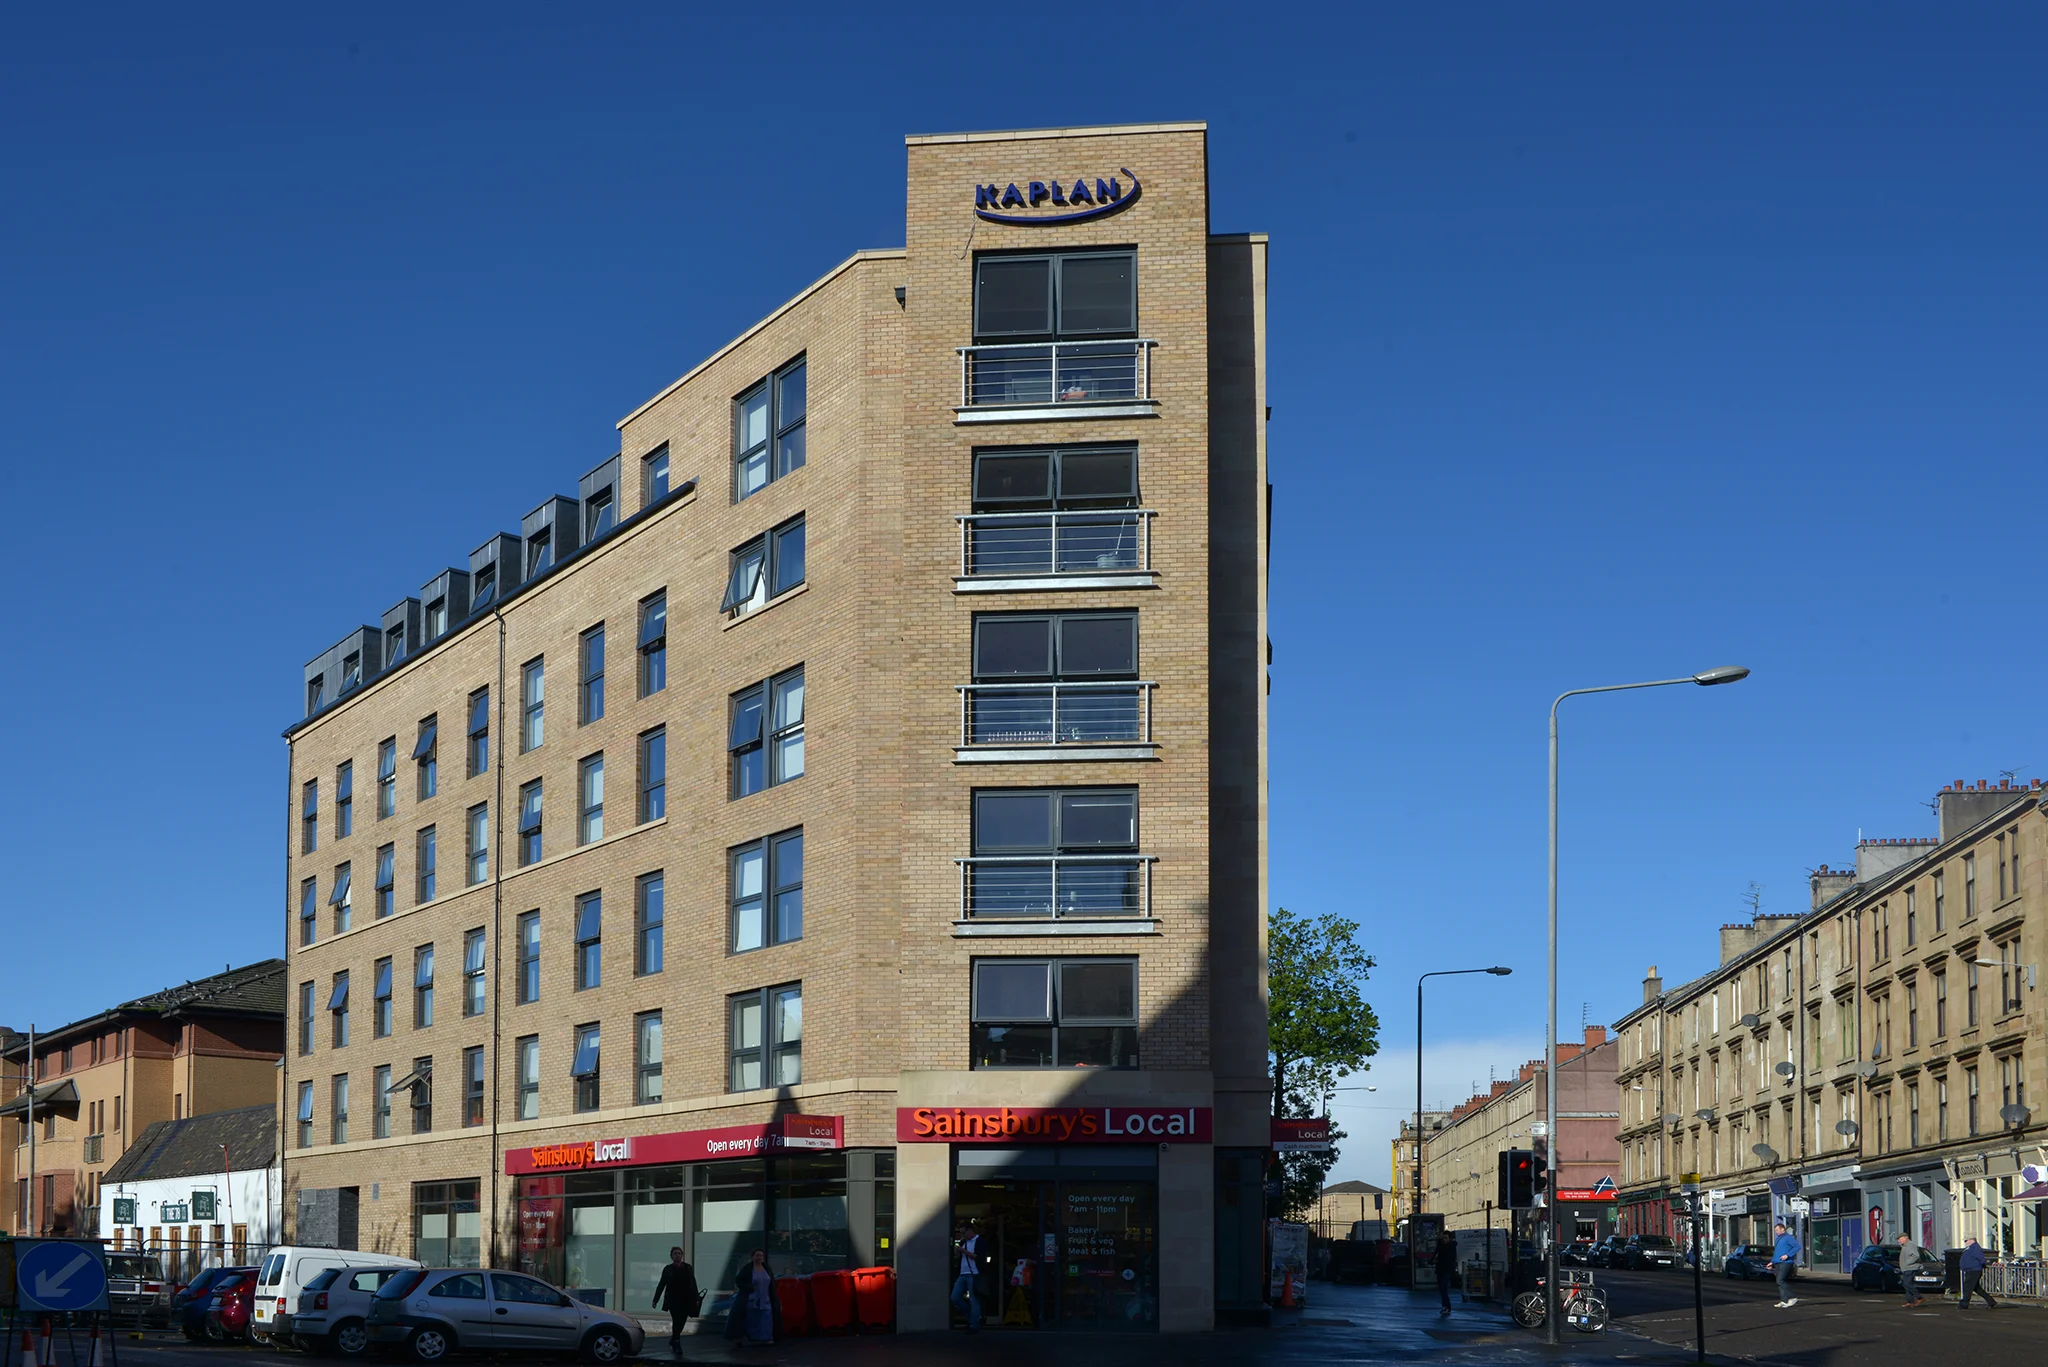 Gibson Street  Student Accommodation in Glasgow